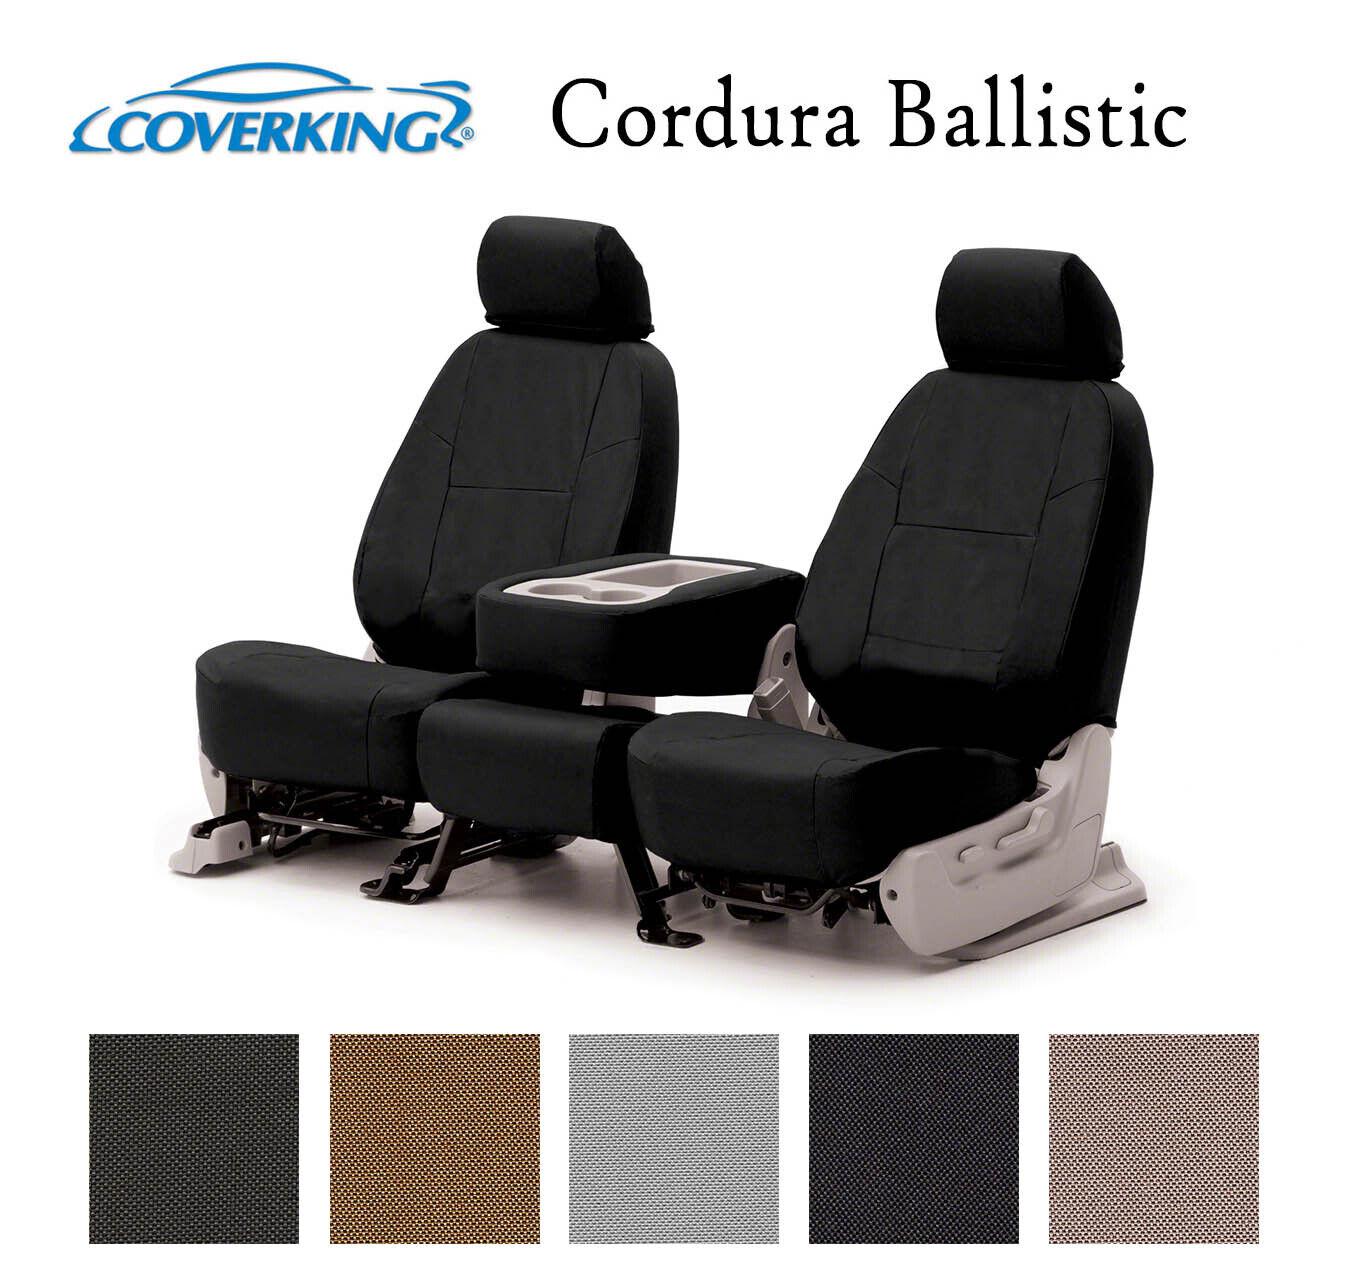 Coverking Custom Seat Covers Ballistic Canvas Front Row - 5 Color Options